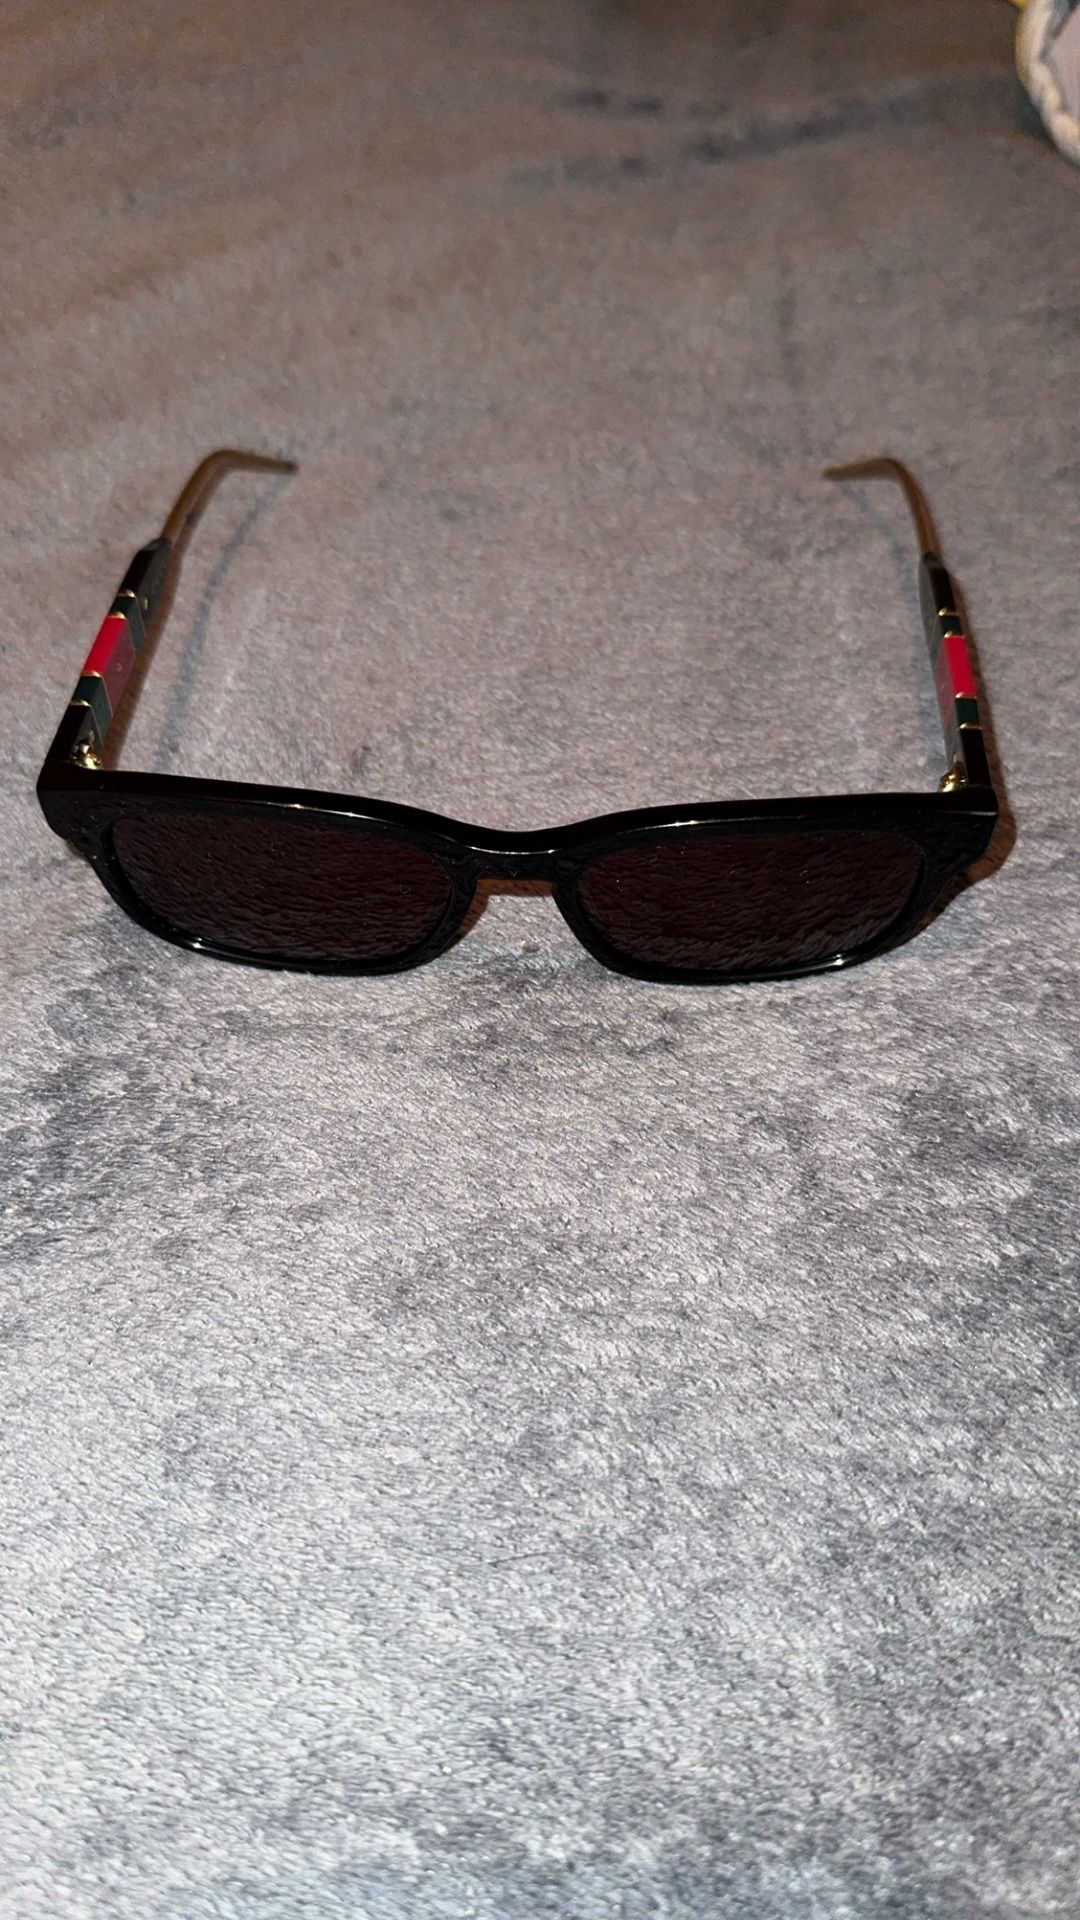 Gucci Sunglasses Asking For 85 Or Better Offer